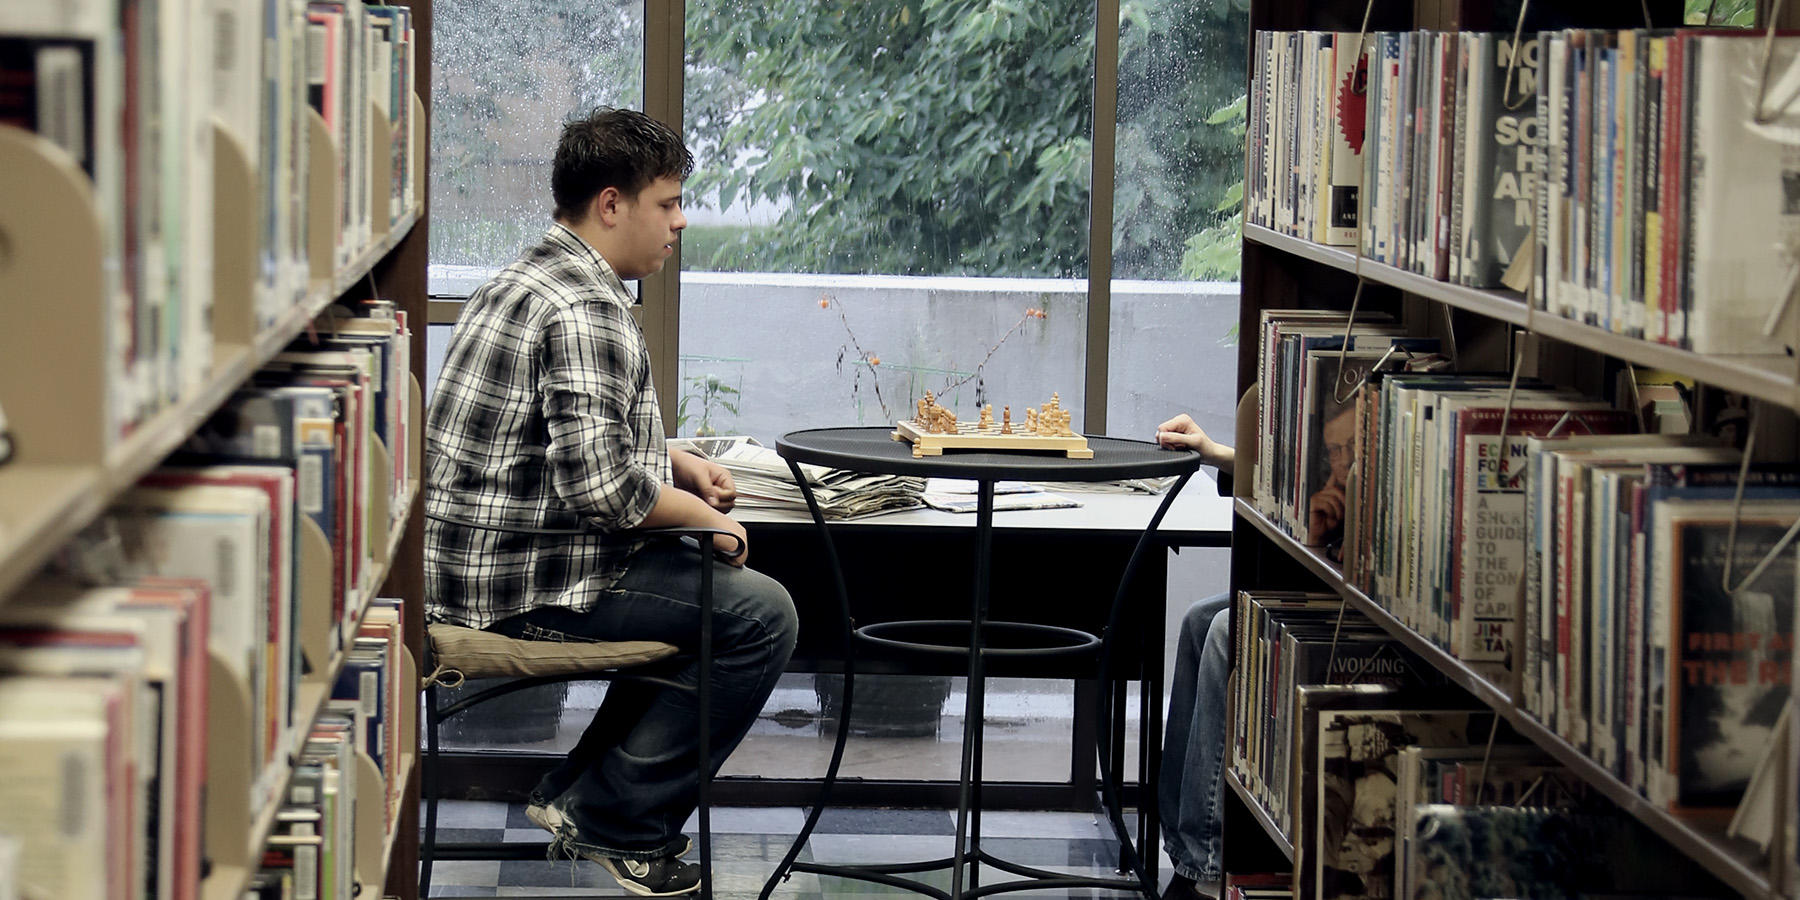 Students in ICC Library playing chess